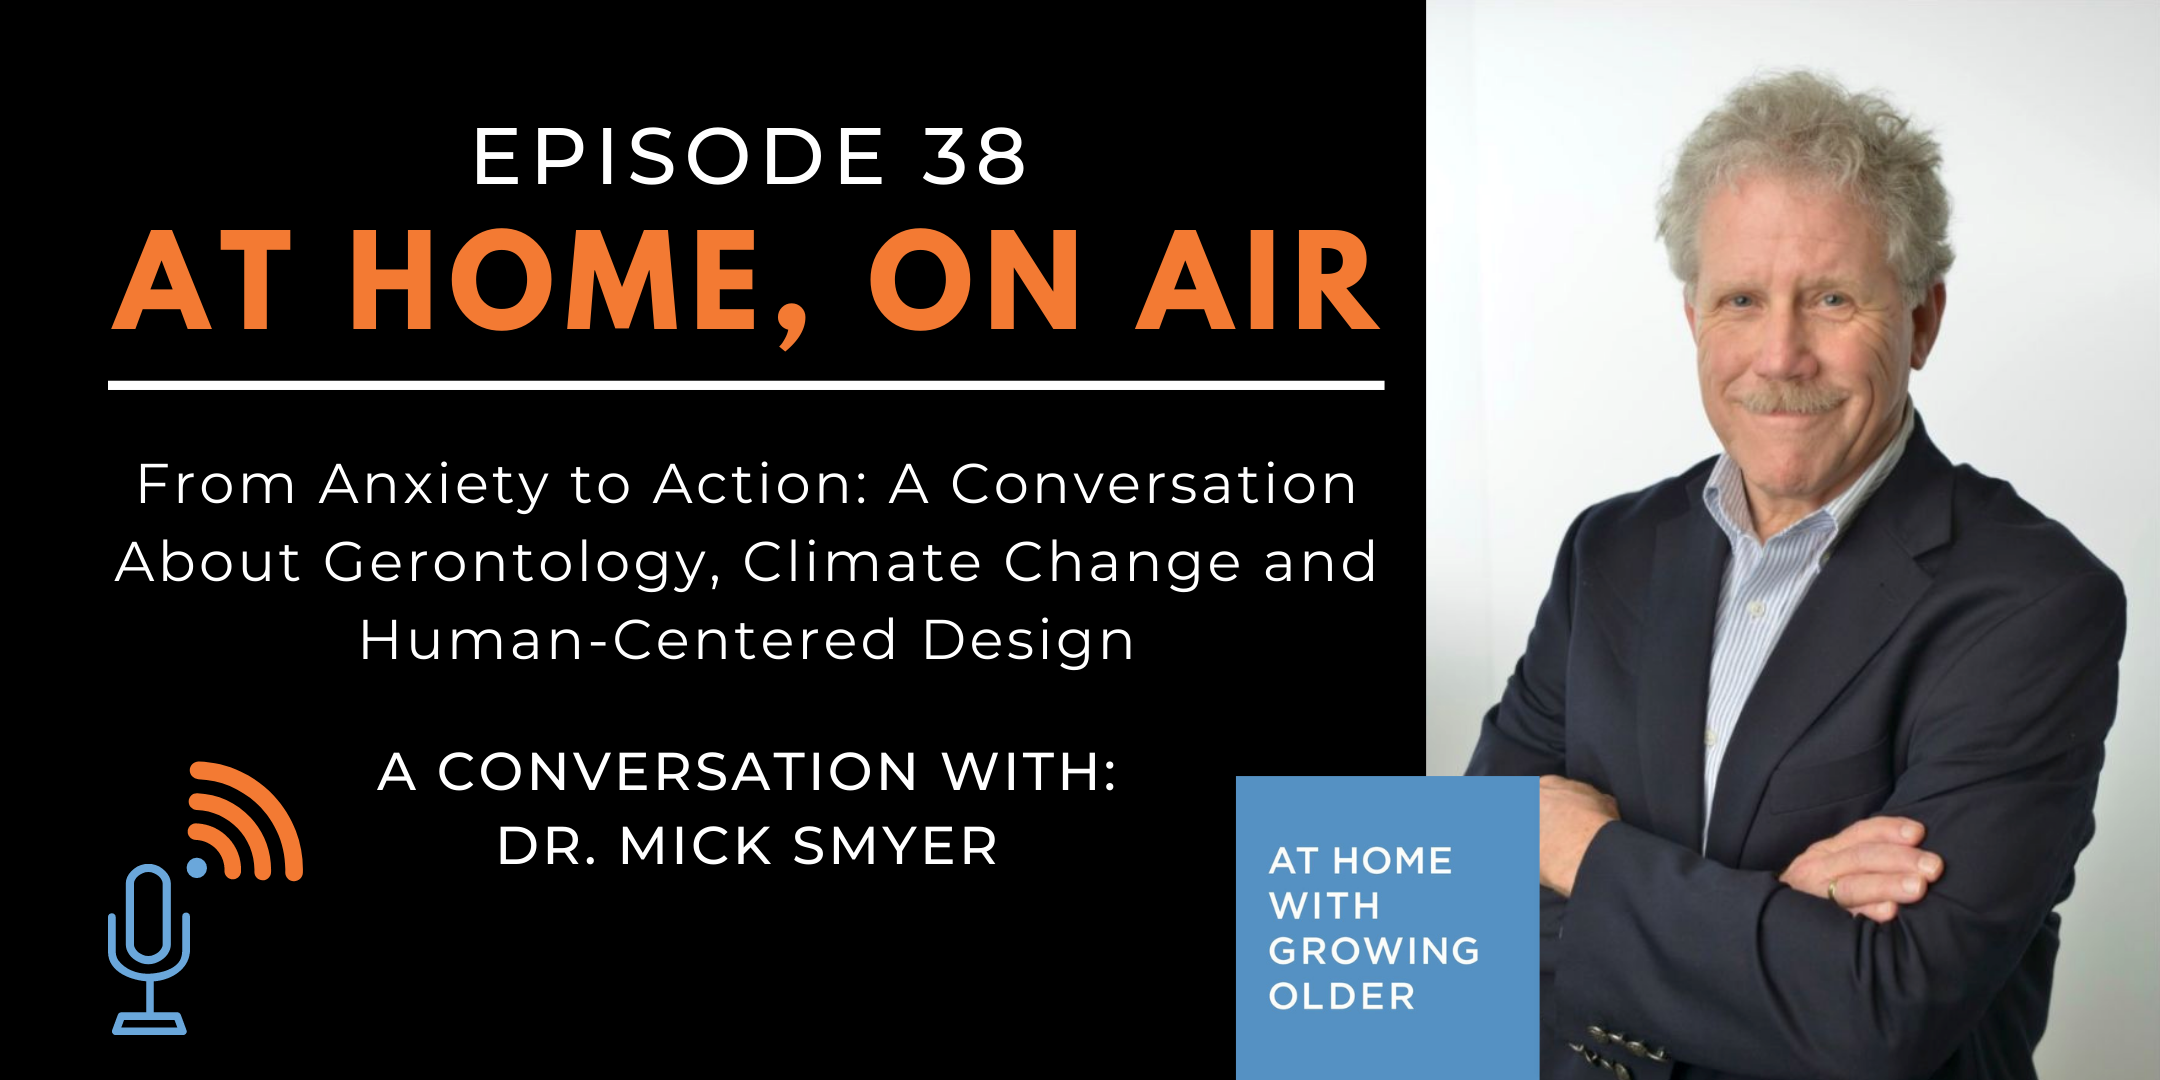 At Home, On Air:  A Conversation with Dr. Michael “Mick” Smyer